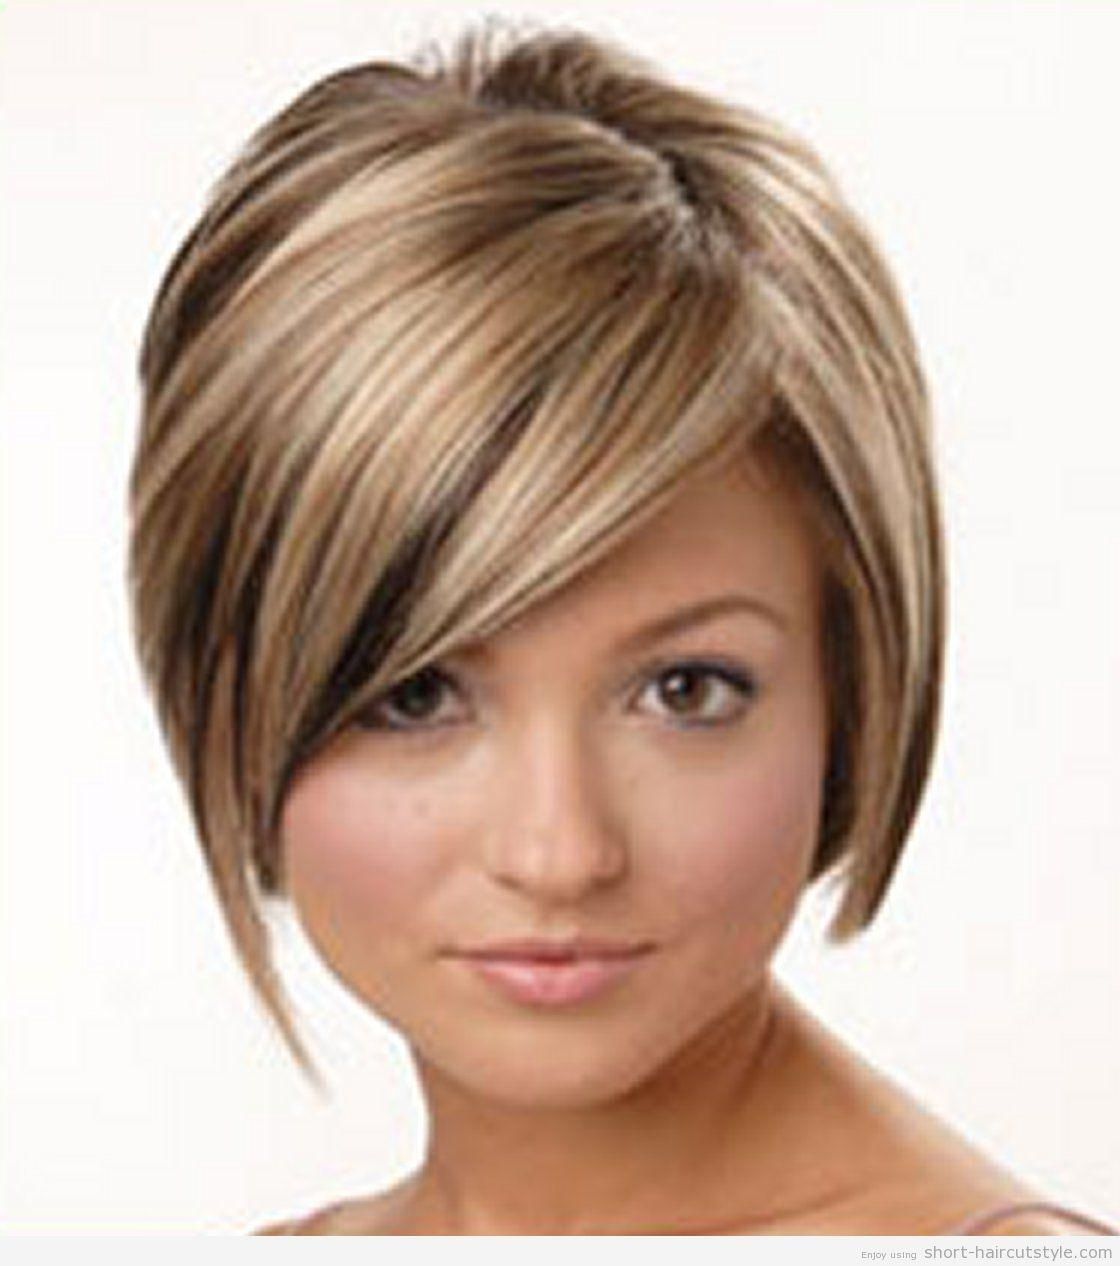 Short Hair Clipart Oval Face 18 – 1120 X 1266 | Dumielauxepices With Regard To Short Haircut Oval Face (View 13 of 25)